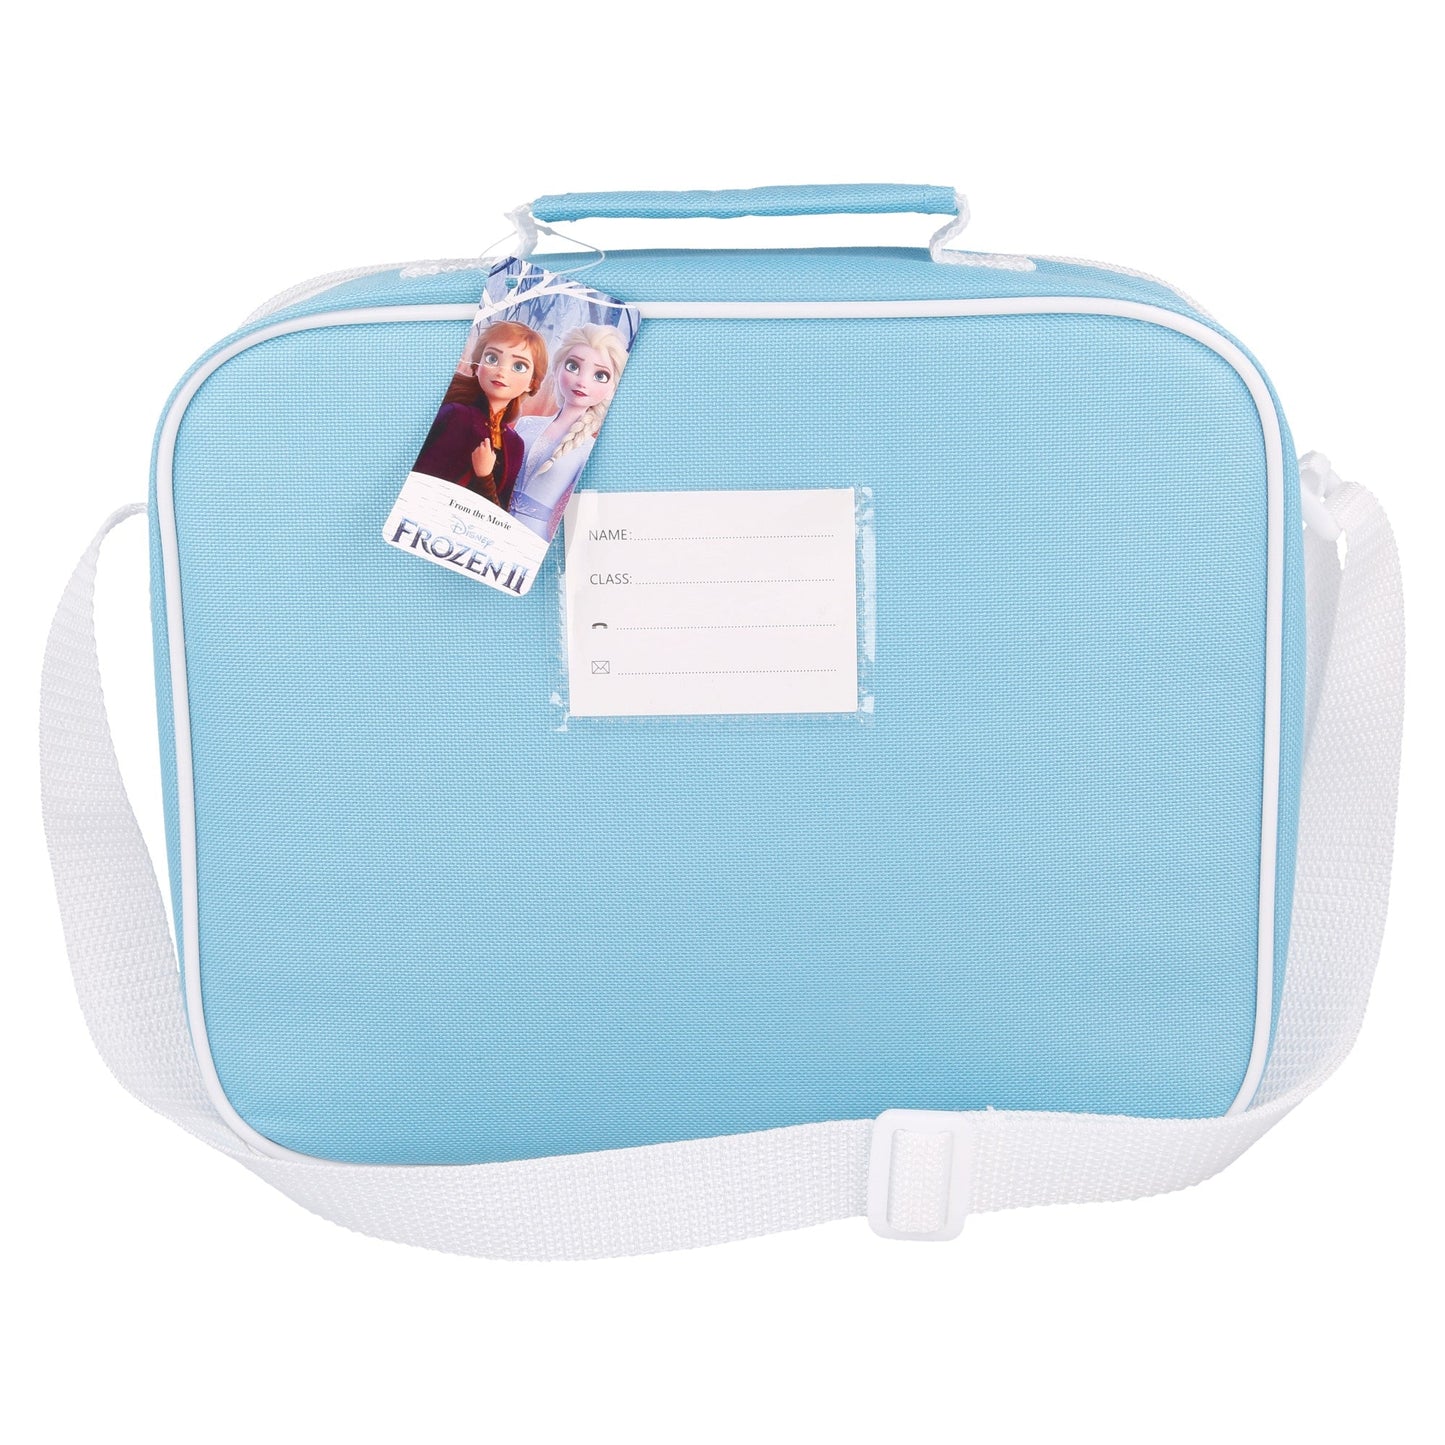 STOR RECTANGULAR INSULATED BAG WITH STRAP FROZEN II BLUE FOREST